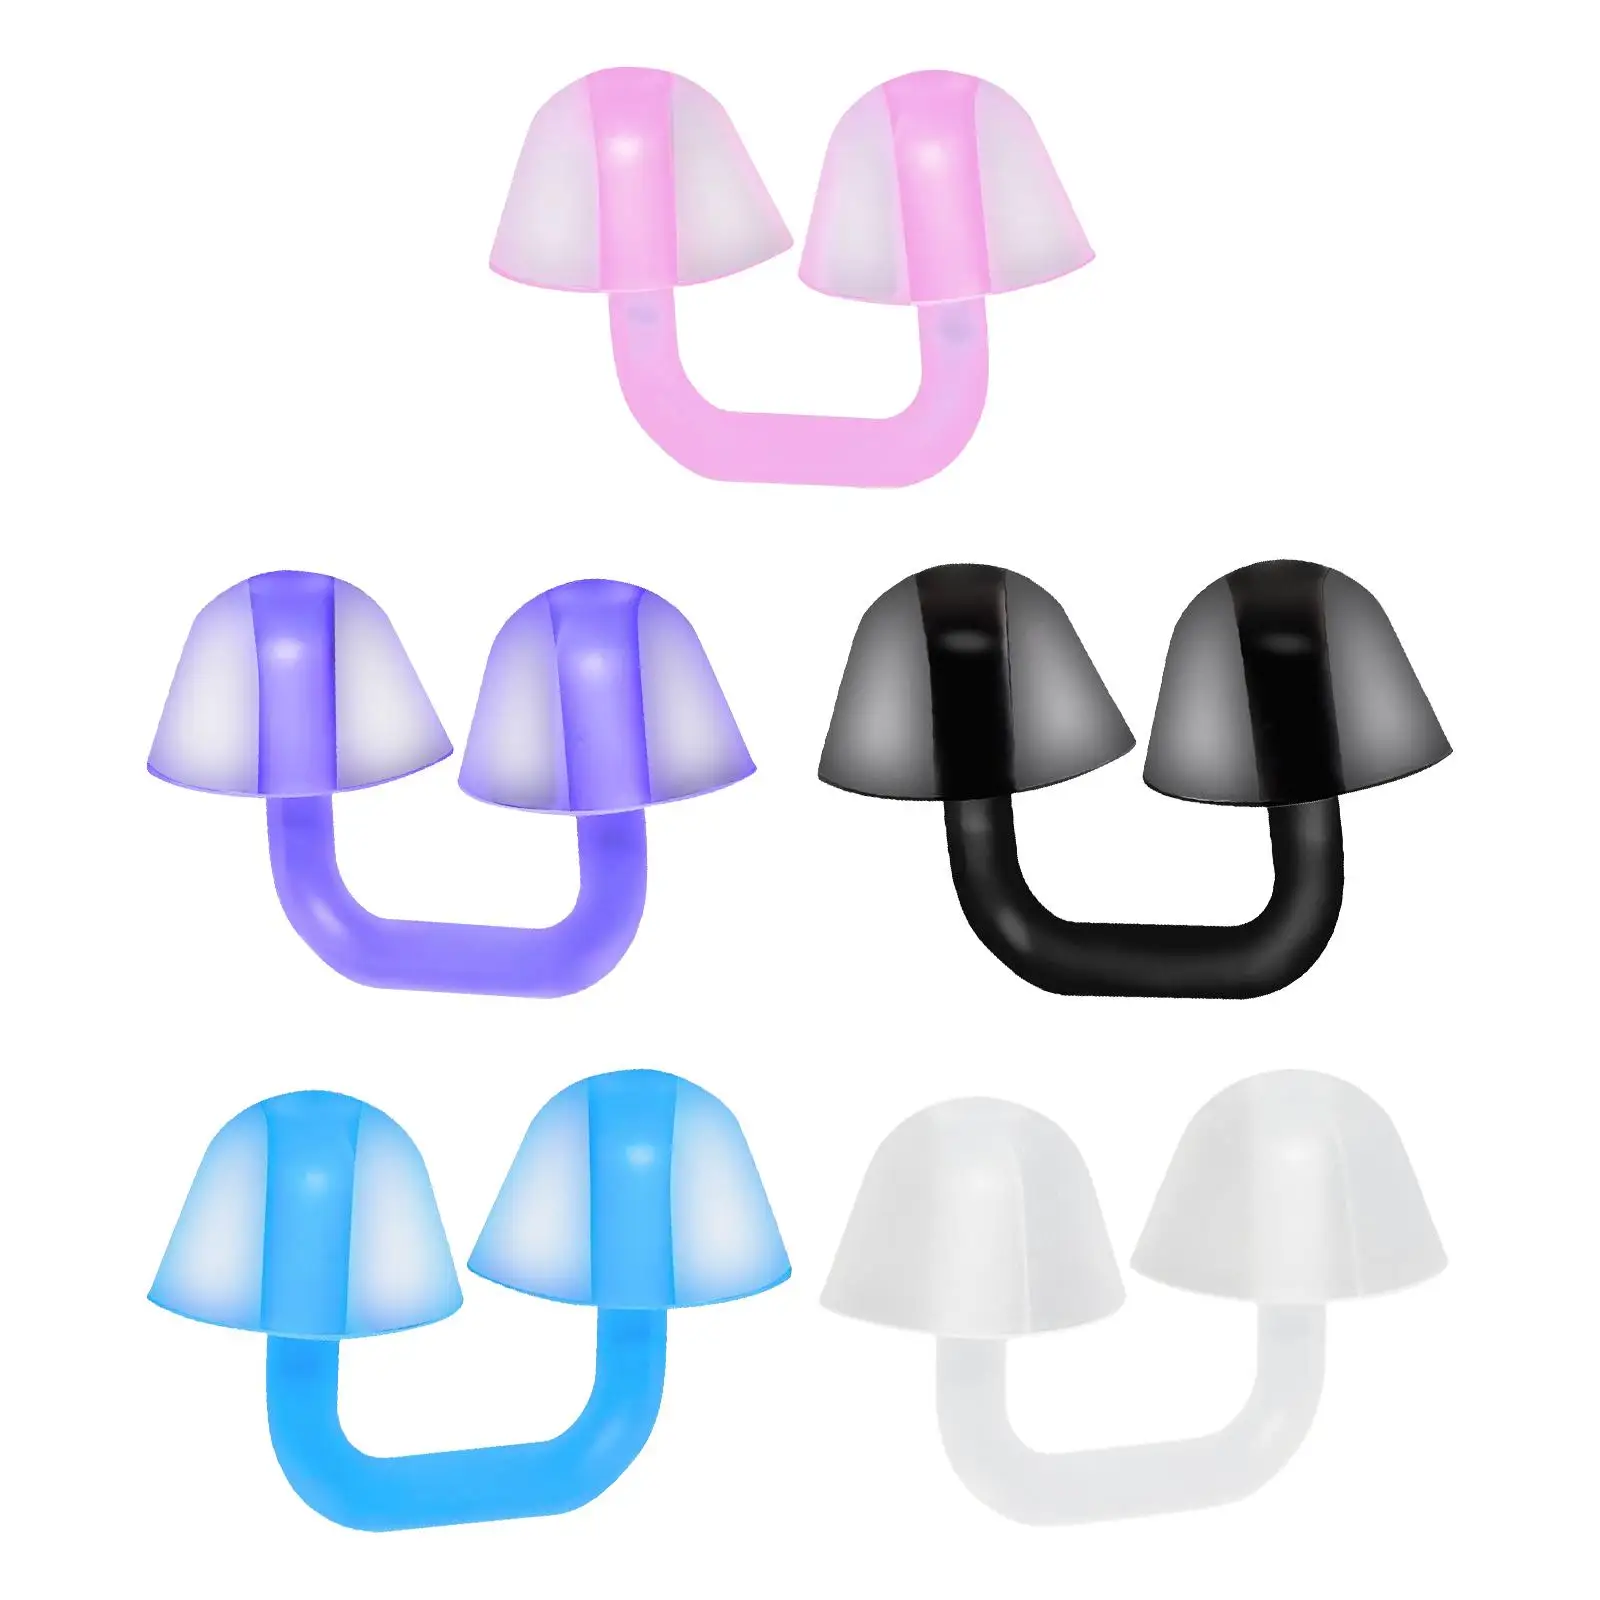 Nose Protector Reusable Swim Nose Clip Swimming Nose Plugs in Nose Waterproof for Pool Practice Adults Kids Surfing Outdoor